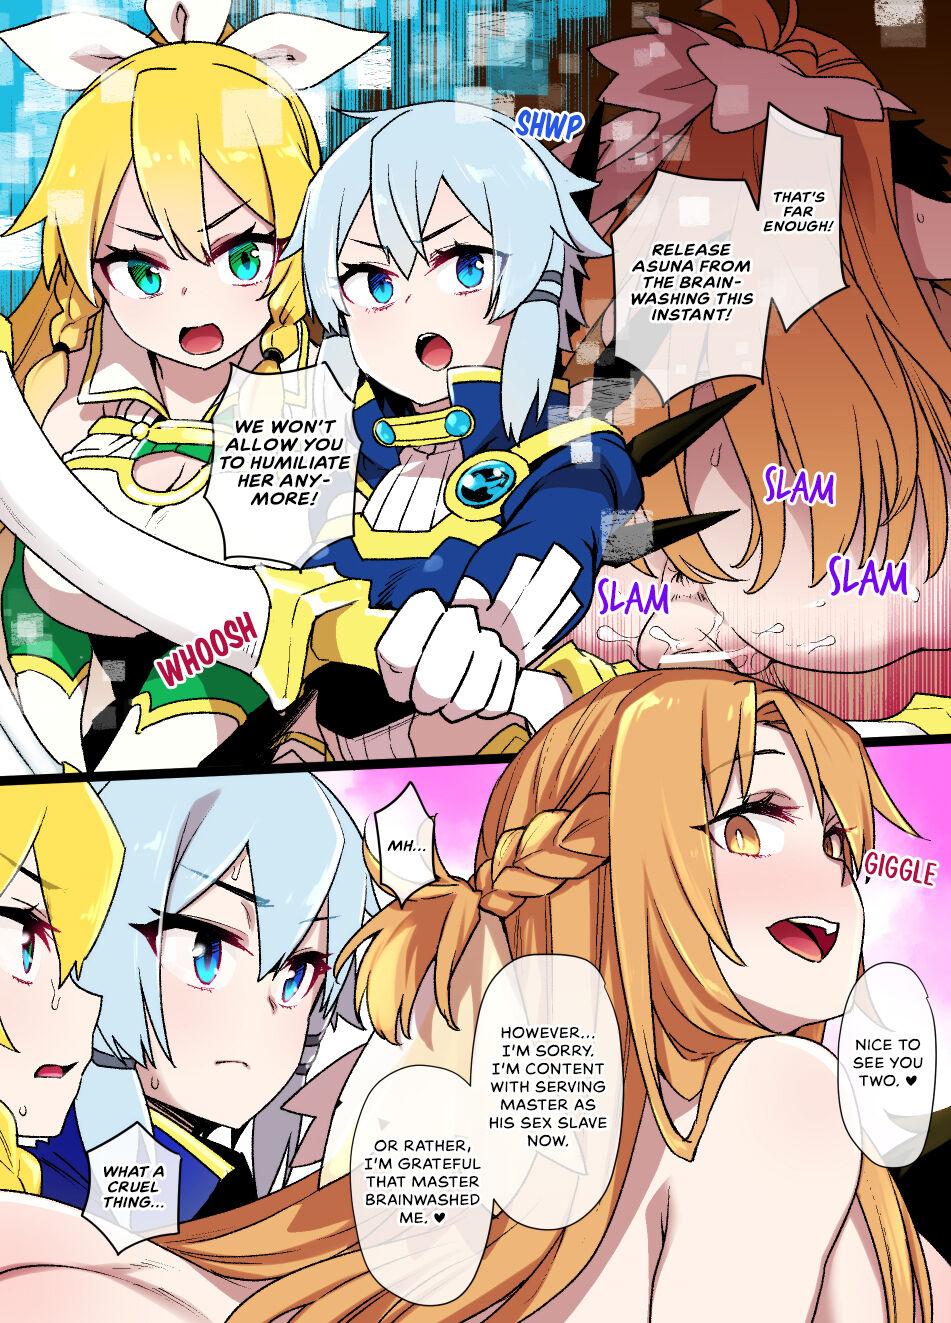 Hot Fucking SAO - Sword art online Cougar - Page 2